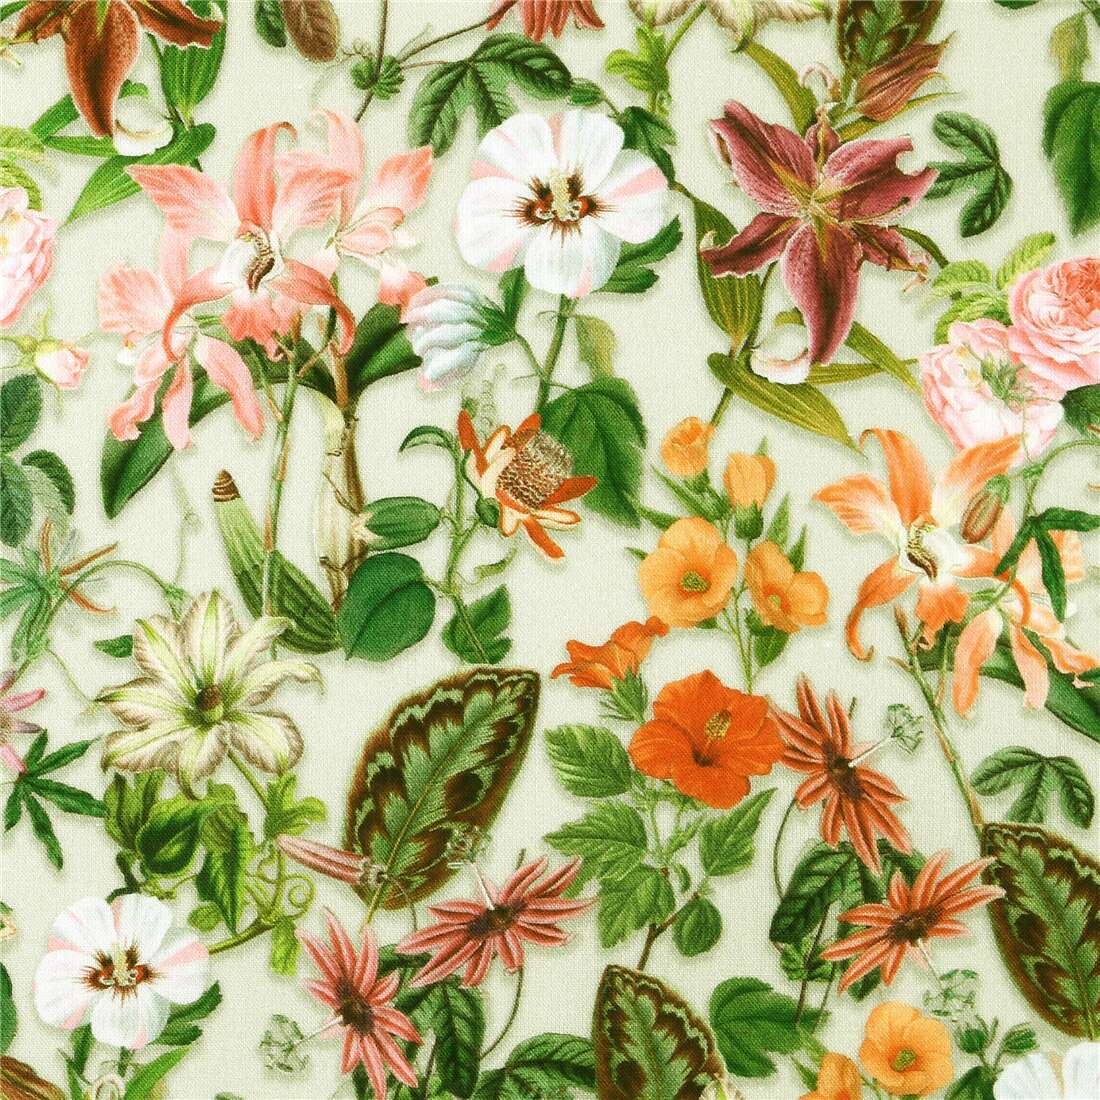 Green Pretty Floral Hibiscus Lily Fabric by Stof France - modeS4u